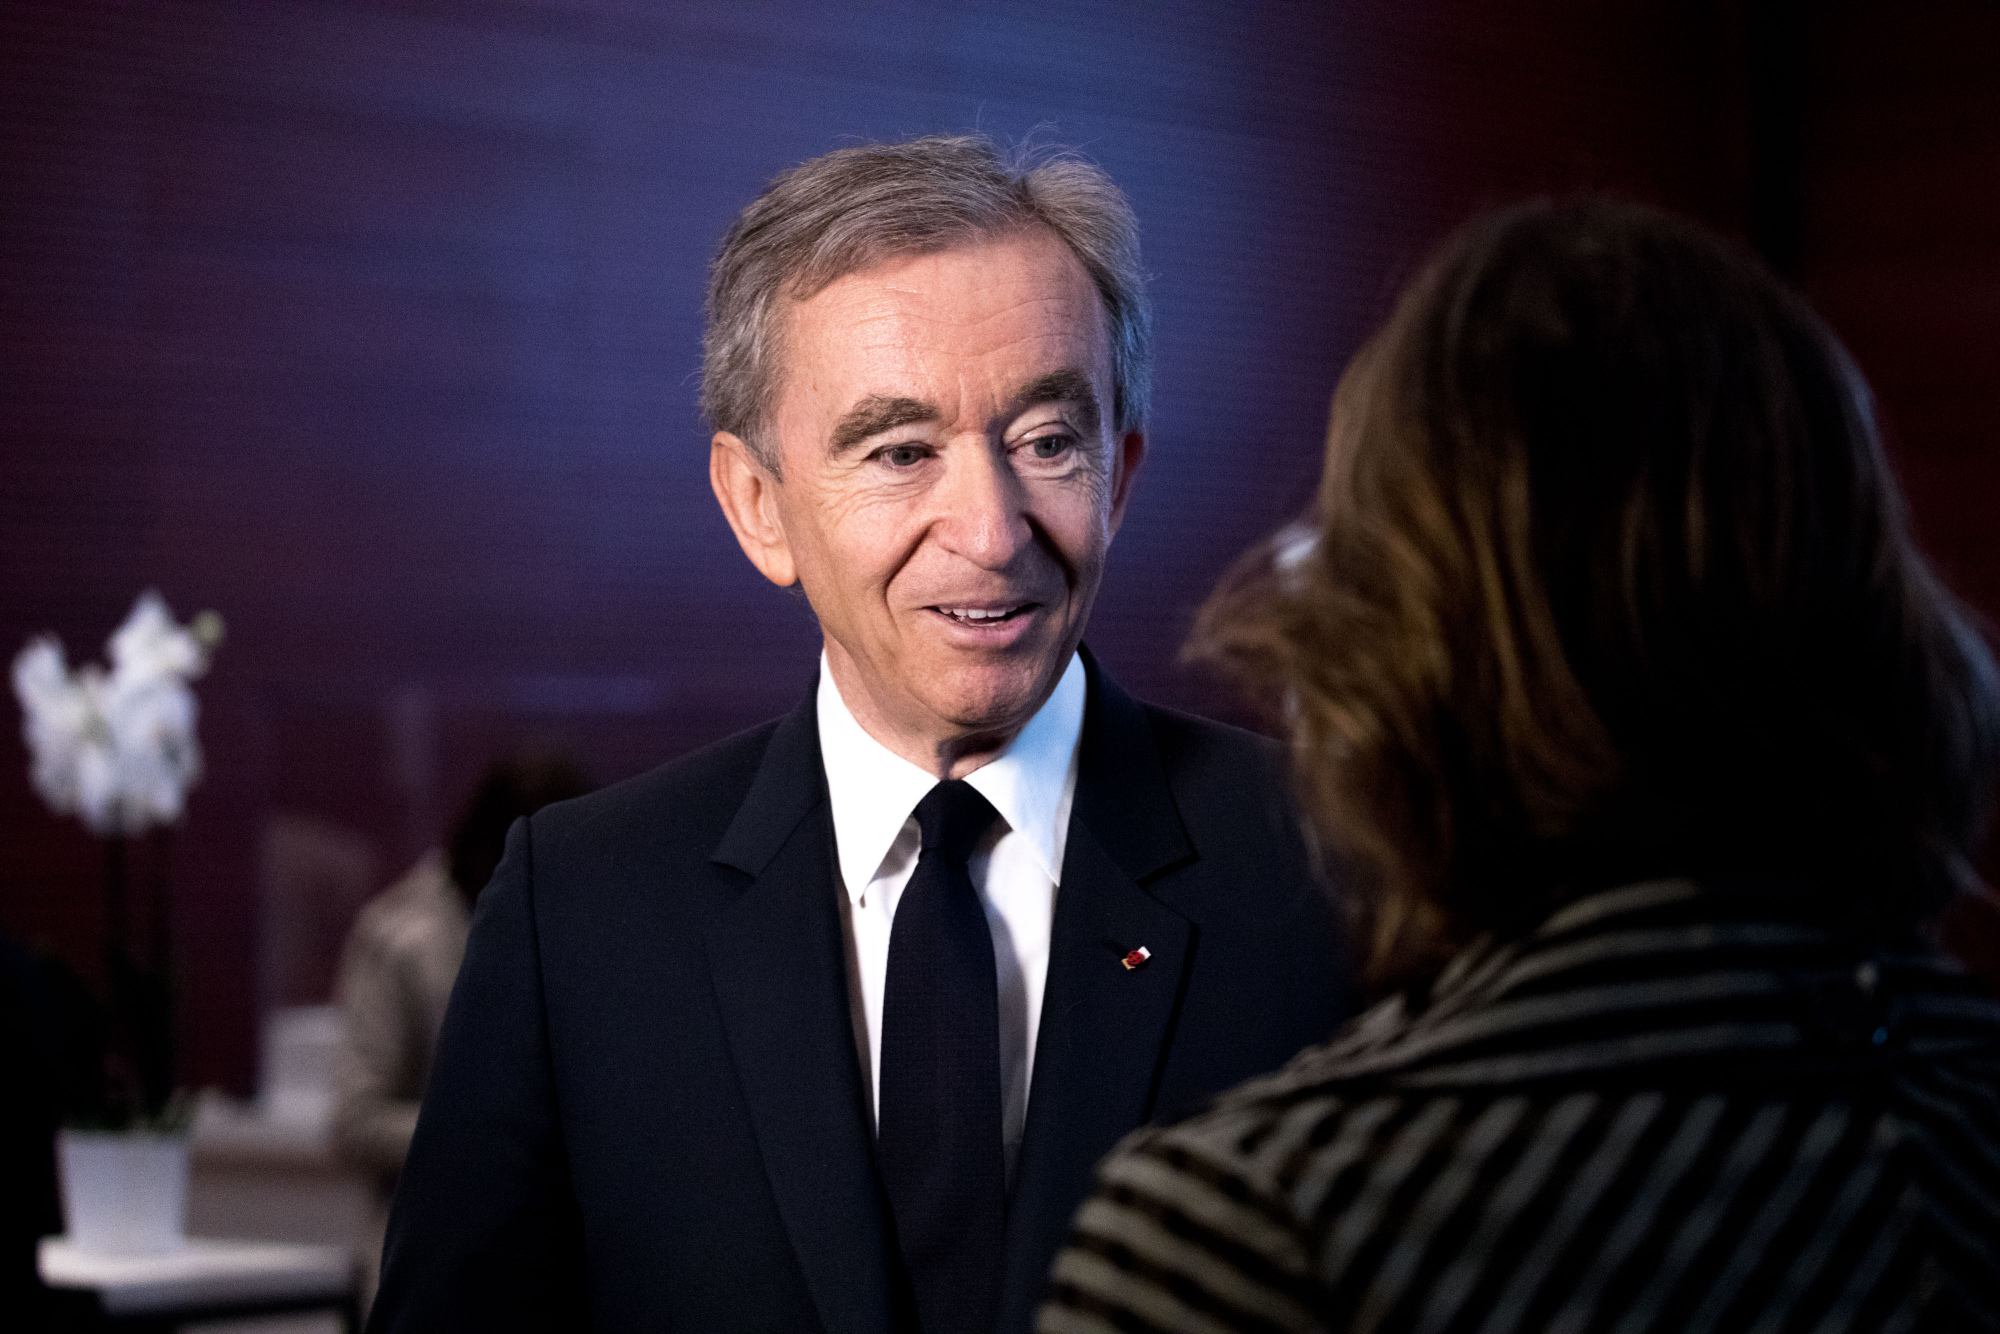 The expensive things LVMH CEO Bernard Arnault bought with his billions